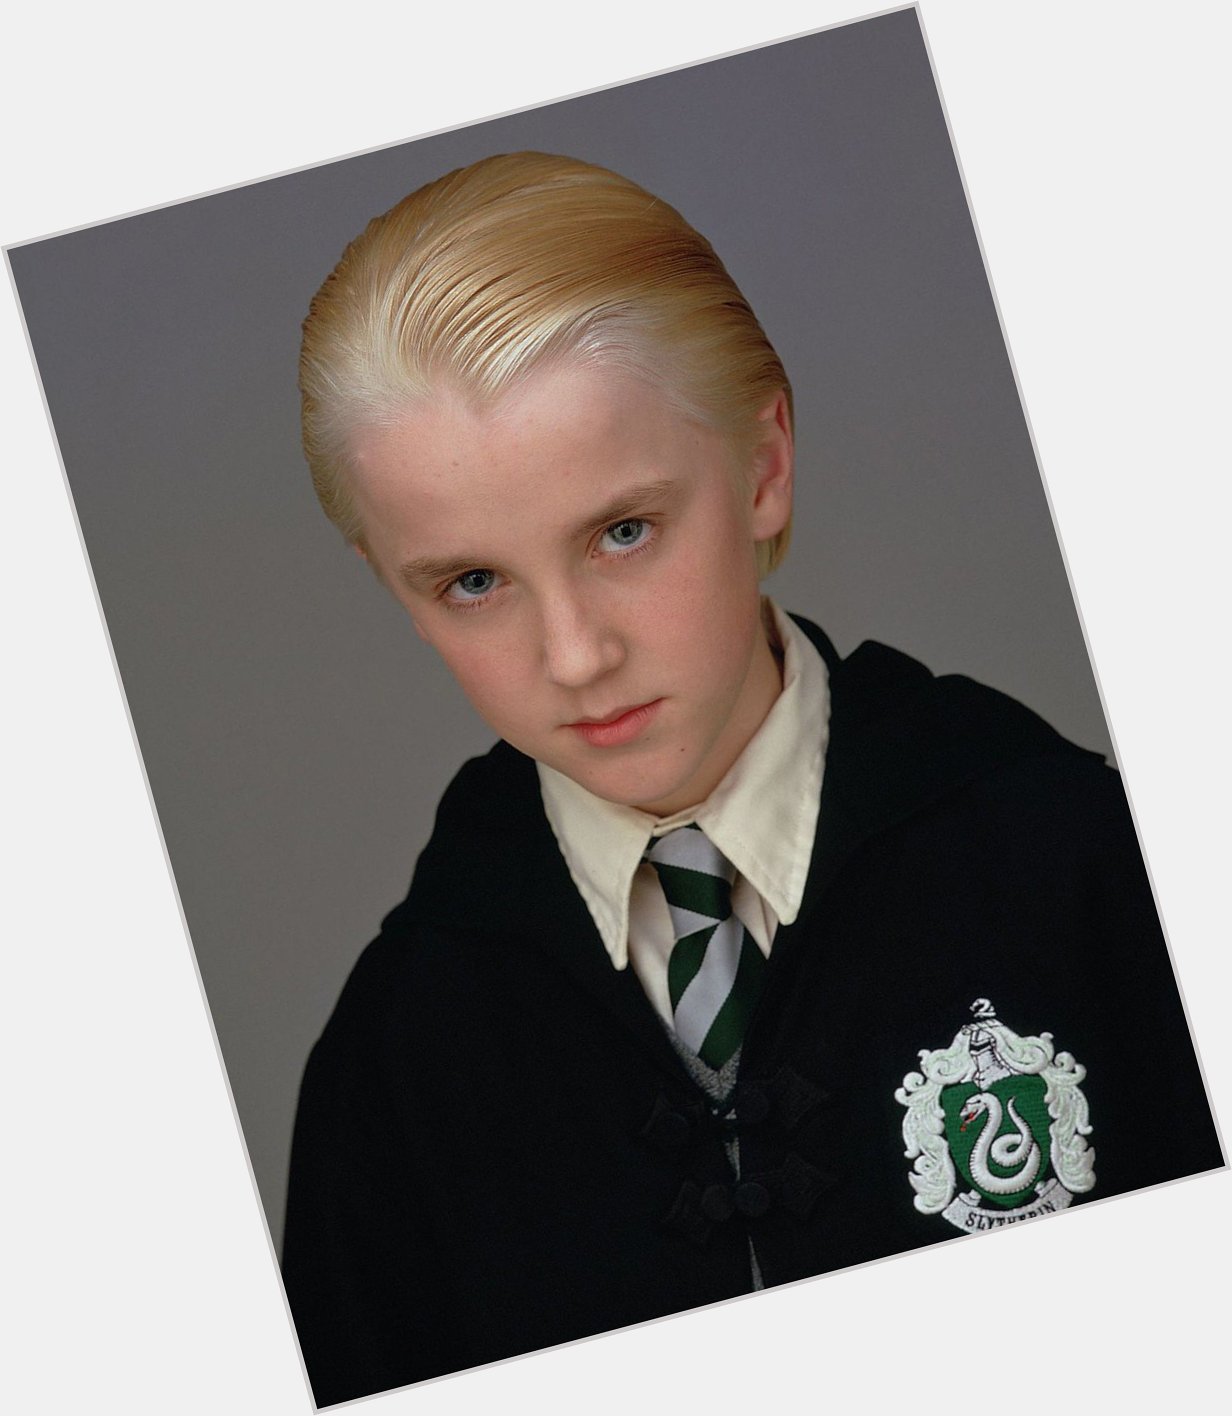 Happy 30th Birthday to Tom Felton. He potrayed the one and only Draco Malfoy! 